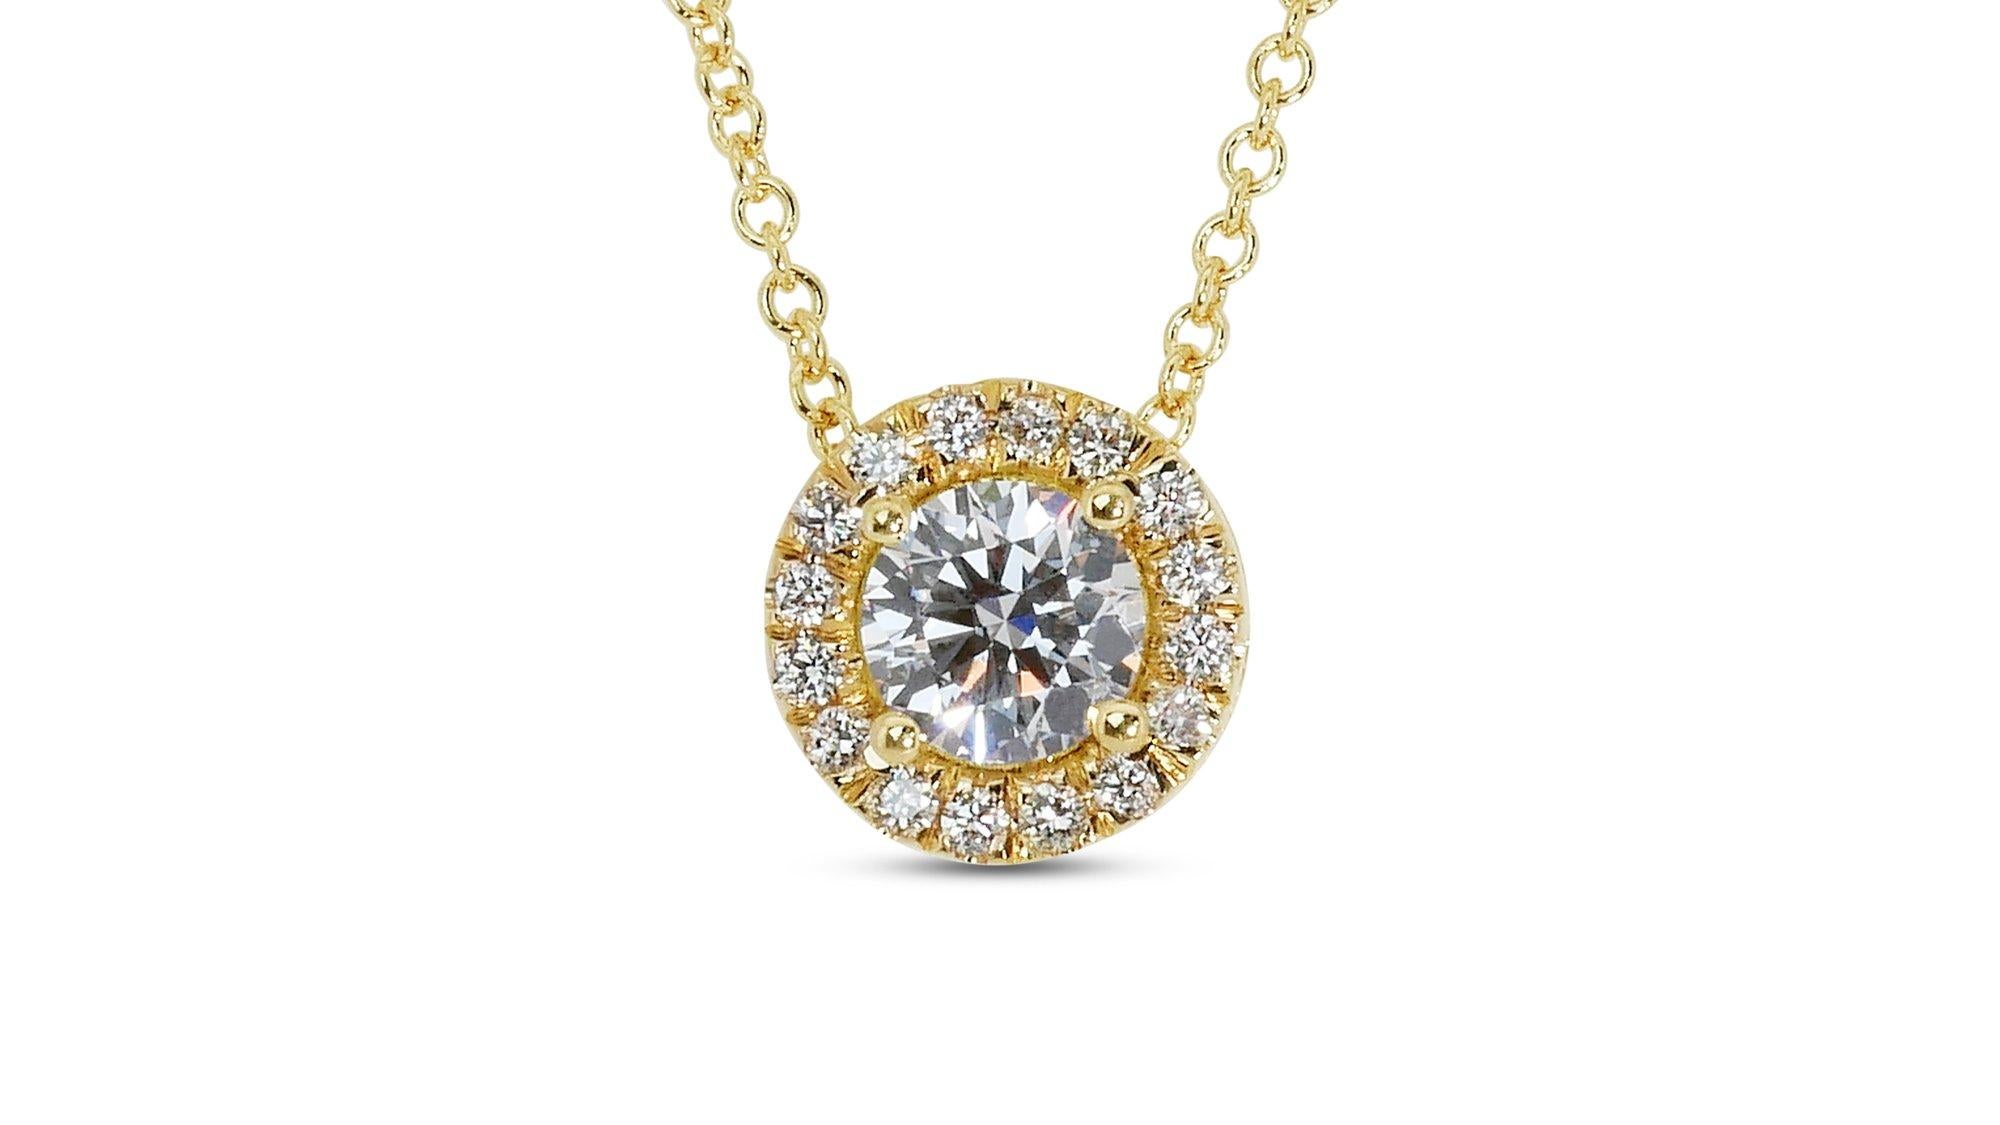 Alluring 1.17ct Diamond Halo Necklace in 18k Yellow Gold - GIA Certified For Sale 3